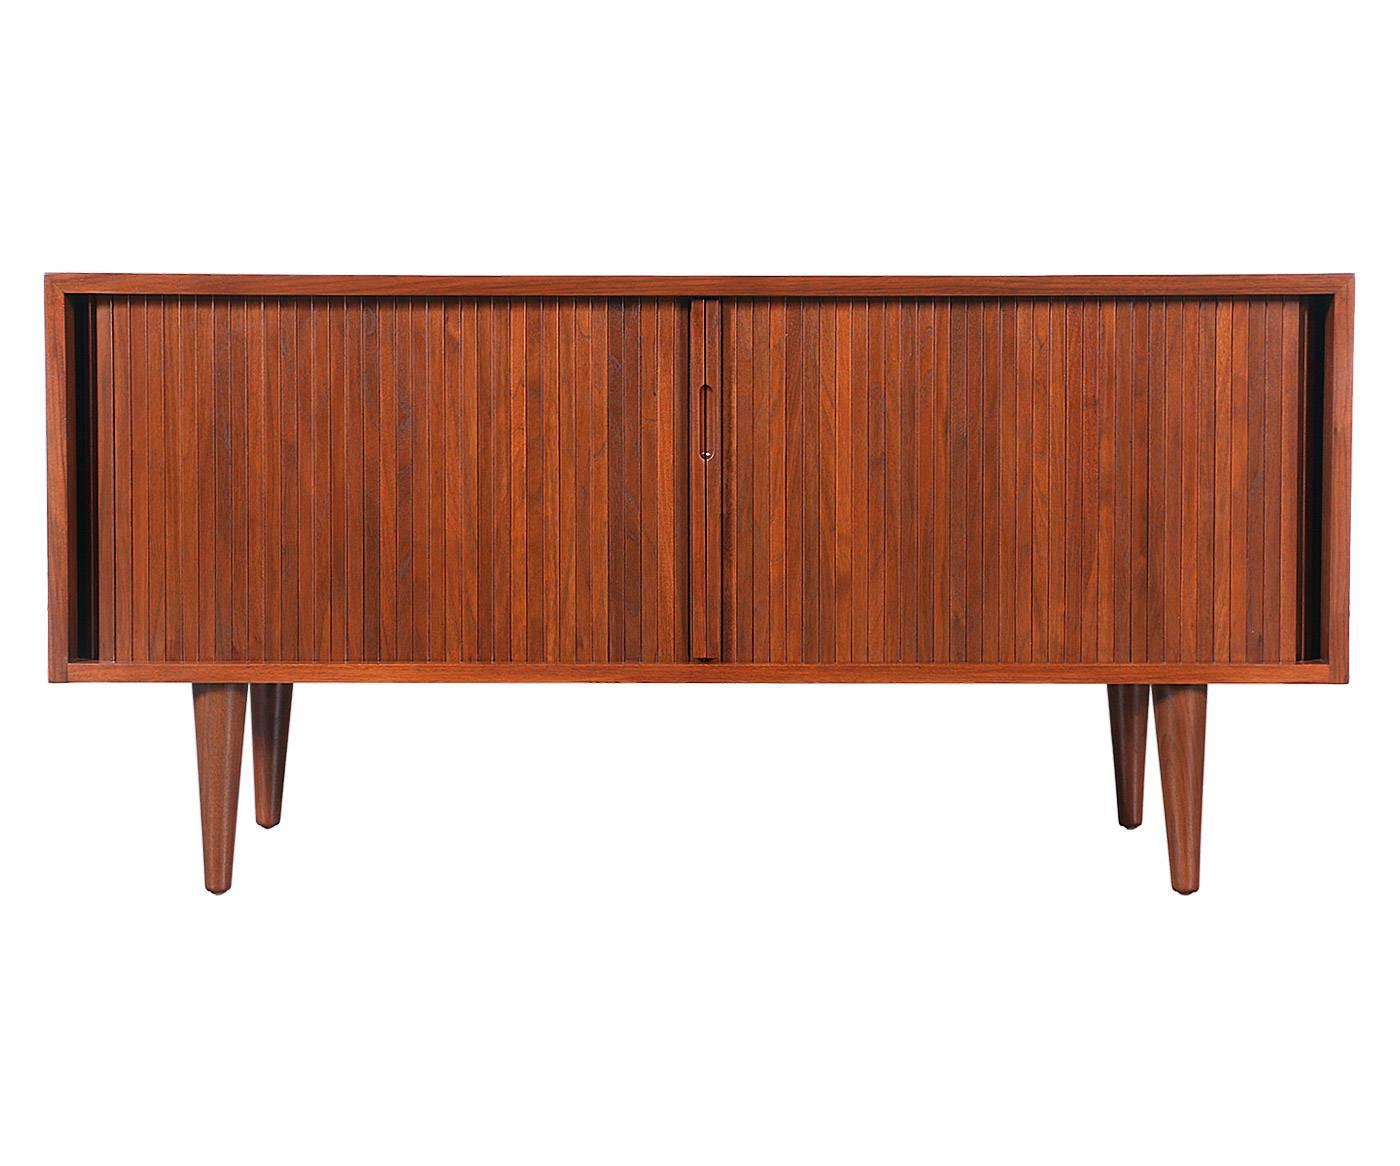 Designer: Milo Baughman.
Manufacturer: Glenn of California.
Period/style: Mid-Century Modern.
Country: United States.
Date: 1950s.

Dimensions: 23.25″ H x 17.75″ W x 47.75″ L.
Materials: Walnut.
Condition: Excellent newly refinished.
Number